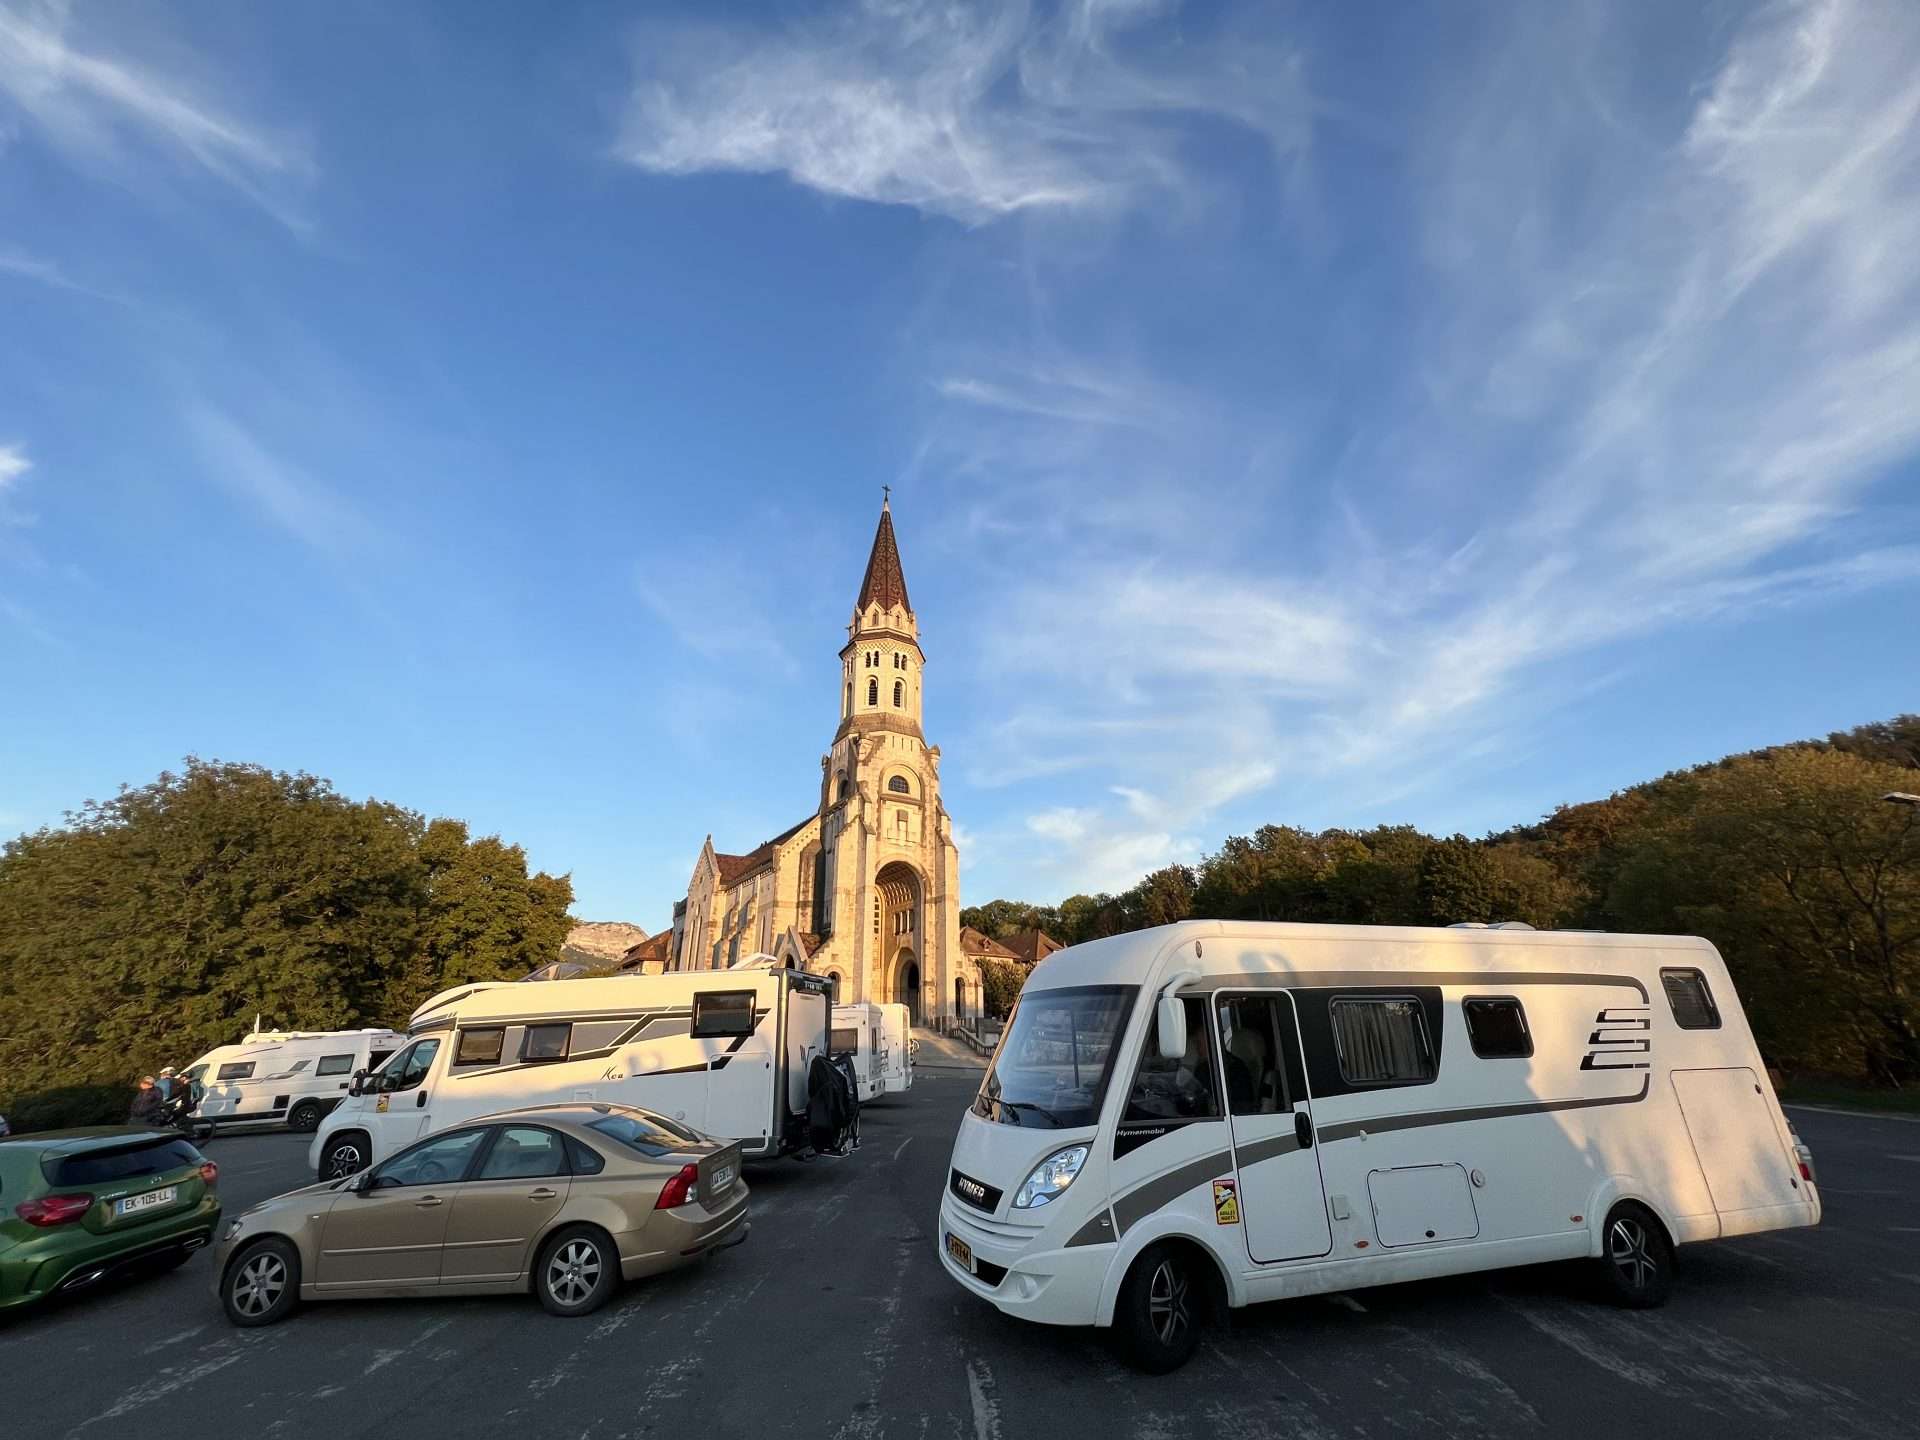 RV parked in front of a church in Europe